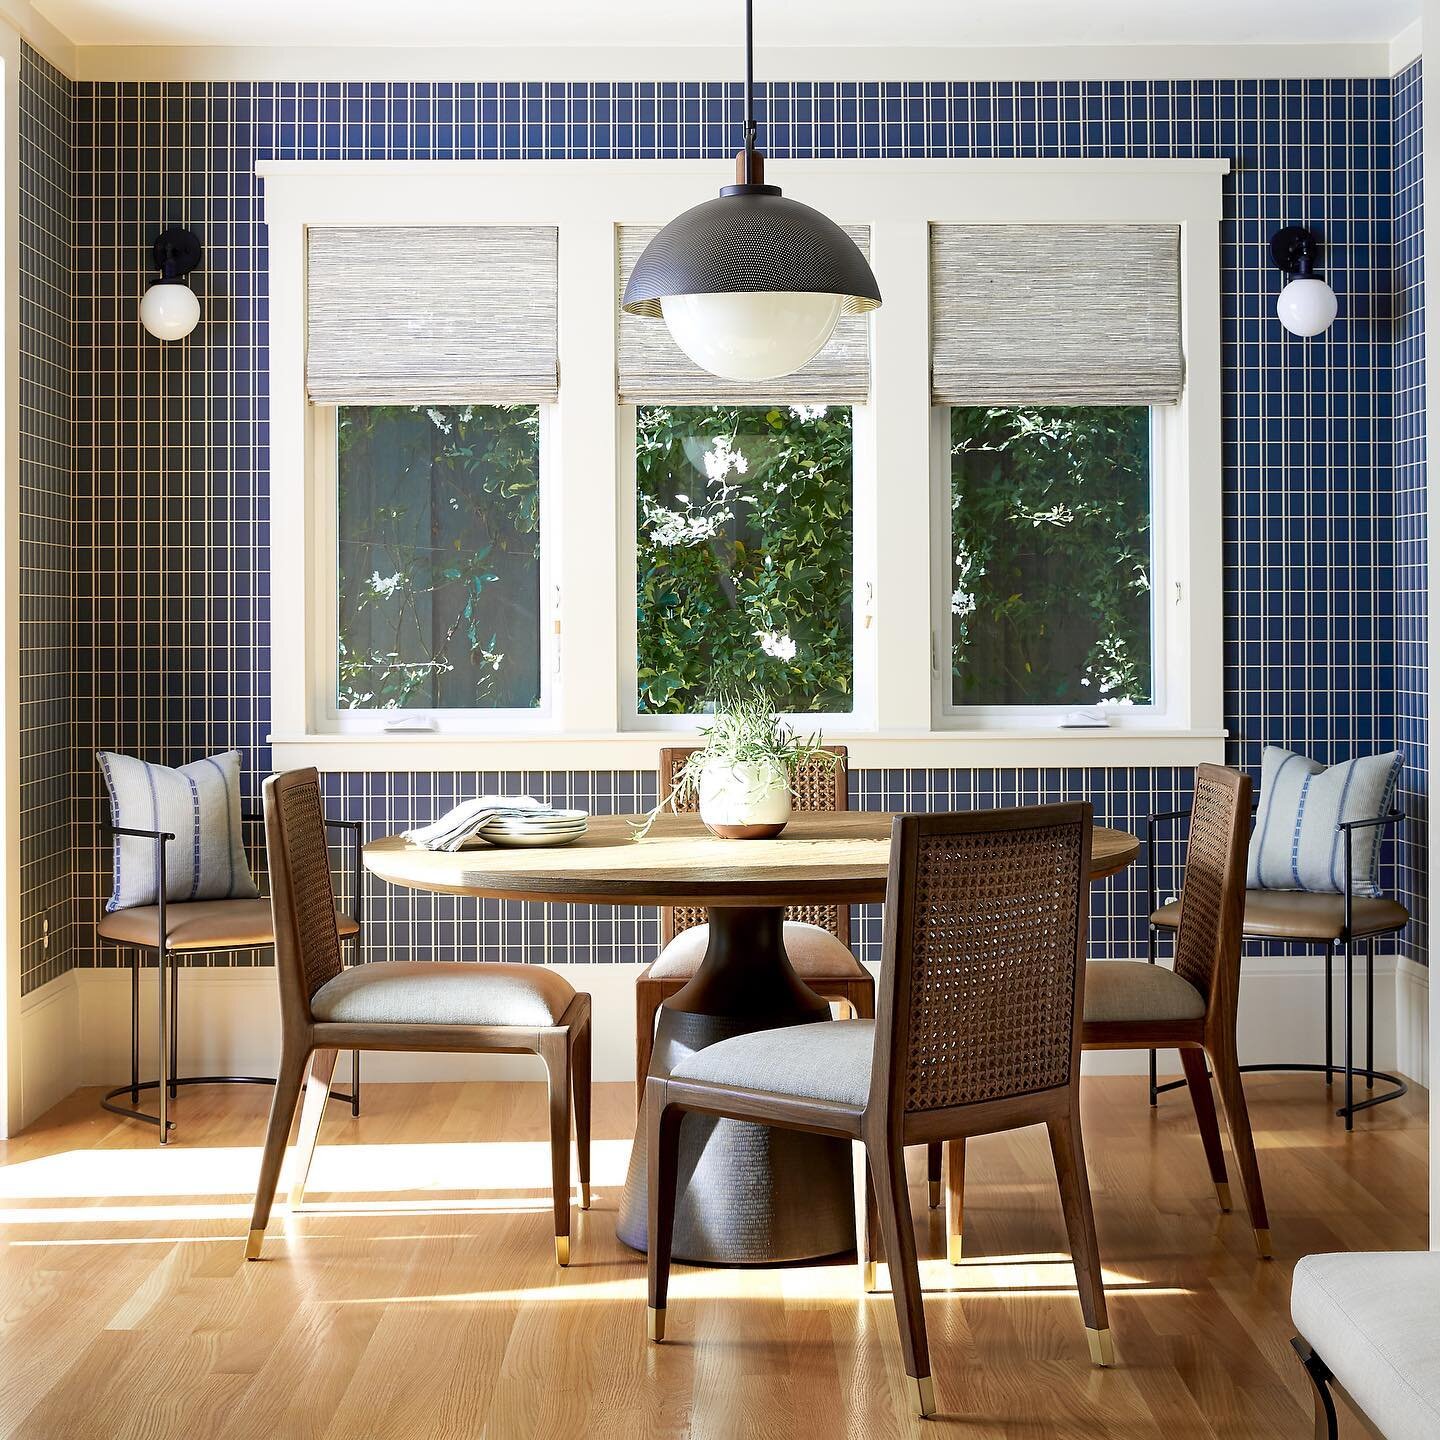 Wow! Thank you so much @homesandgardensuk for the lovely feature! [link in bio]  If I have to pick just one space, this Dining Room is definitely my favorite. I love how the windowpane wallpaper brings interest to the limited wall space, and the comb